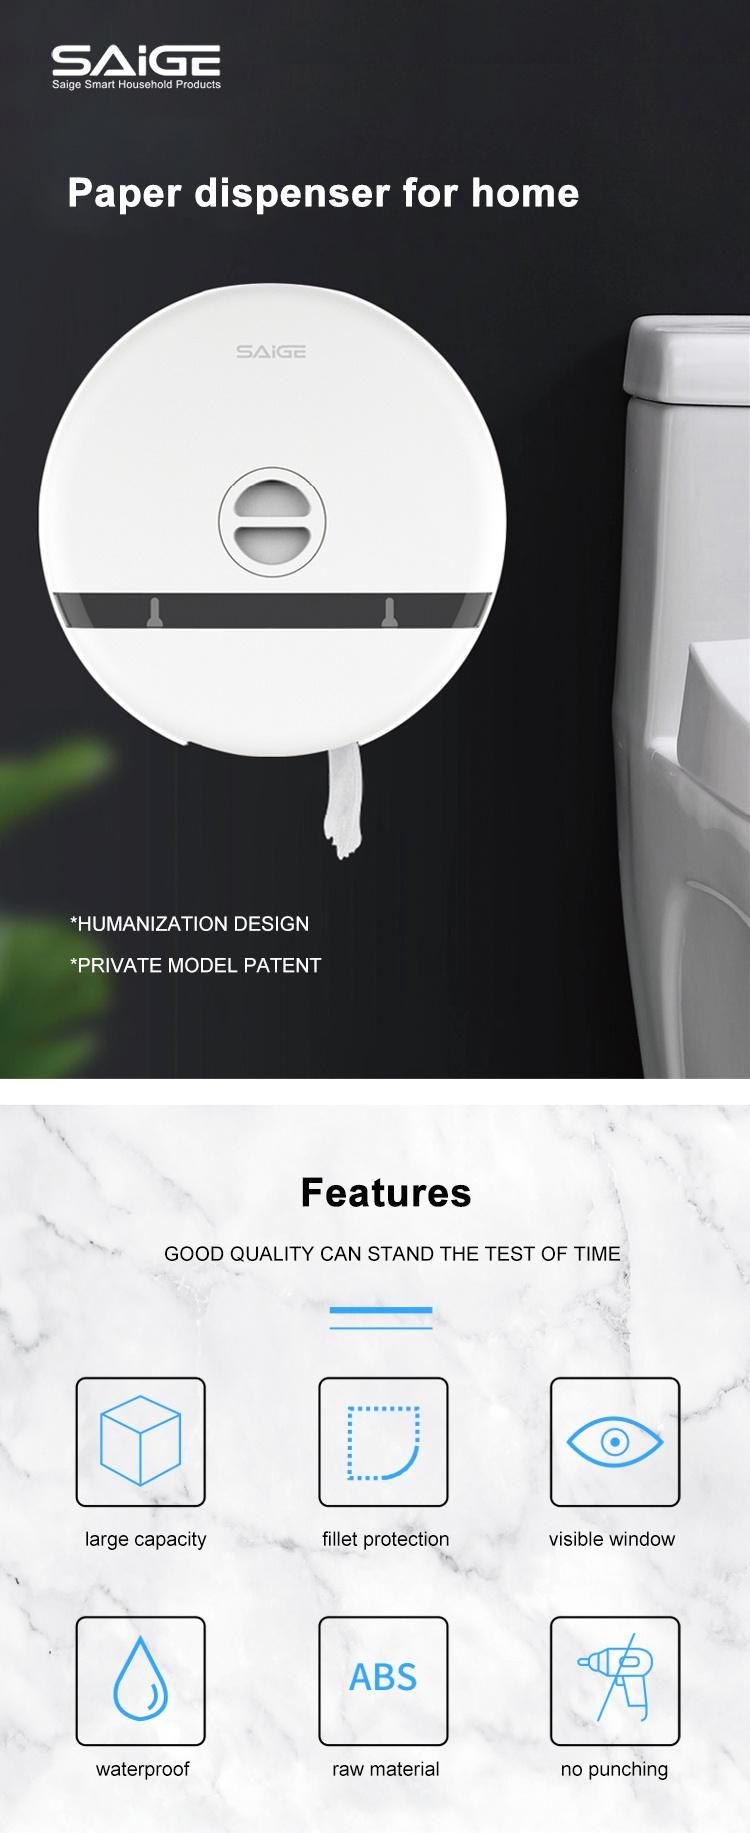 Saige High Quality Wall Mounted ABS Plastic Jumbo Toilet Paper Holder